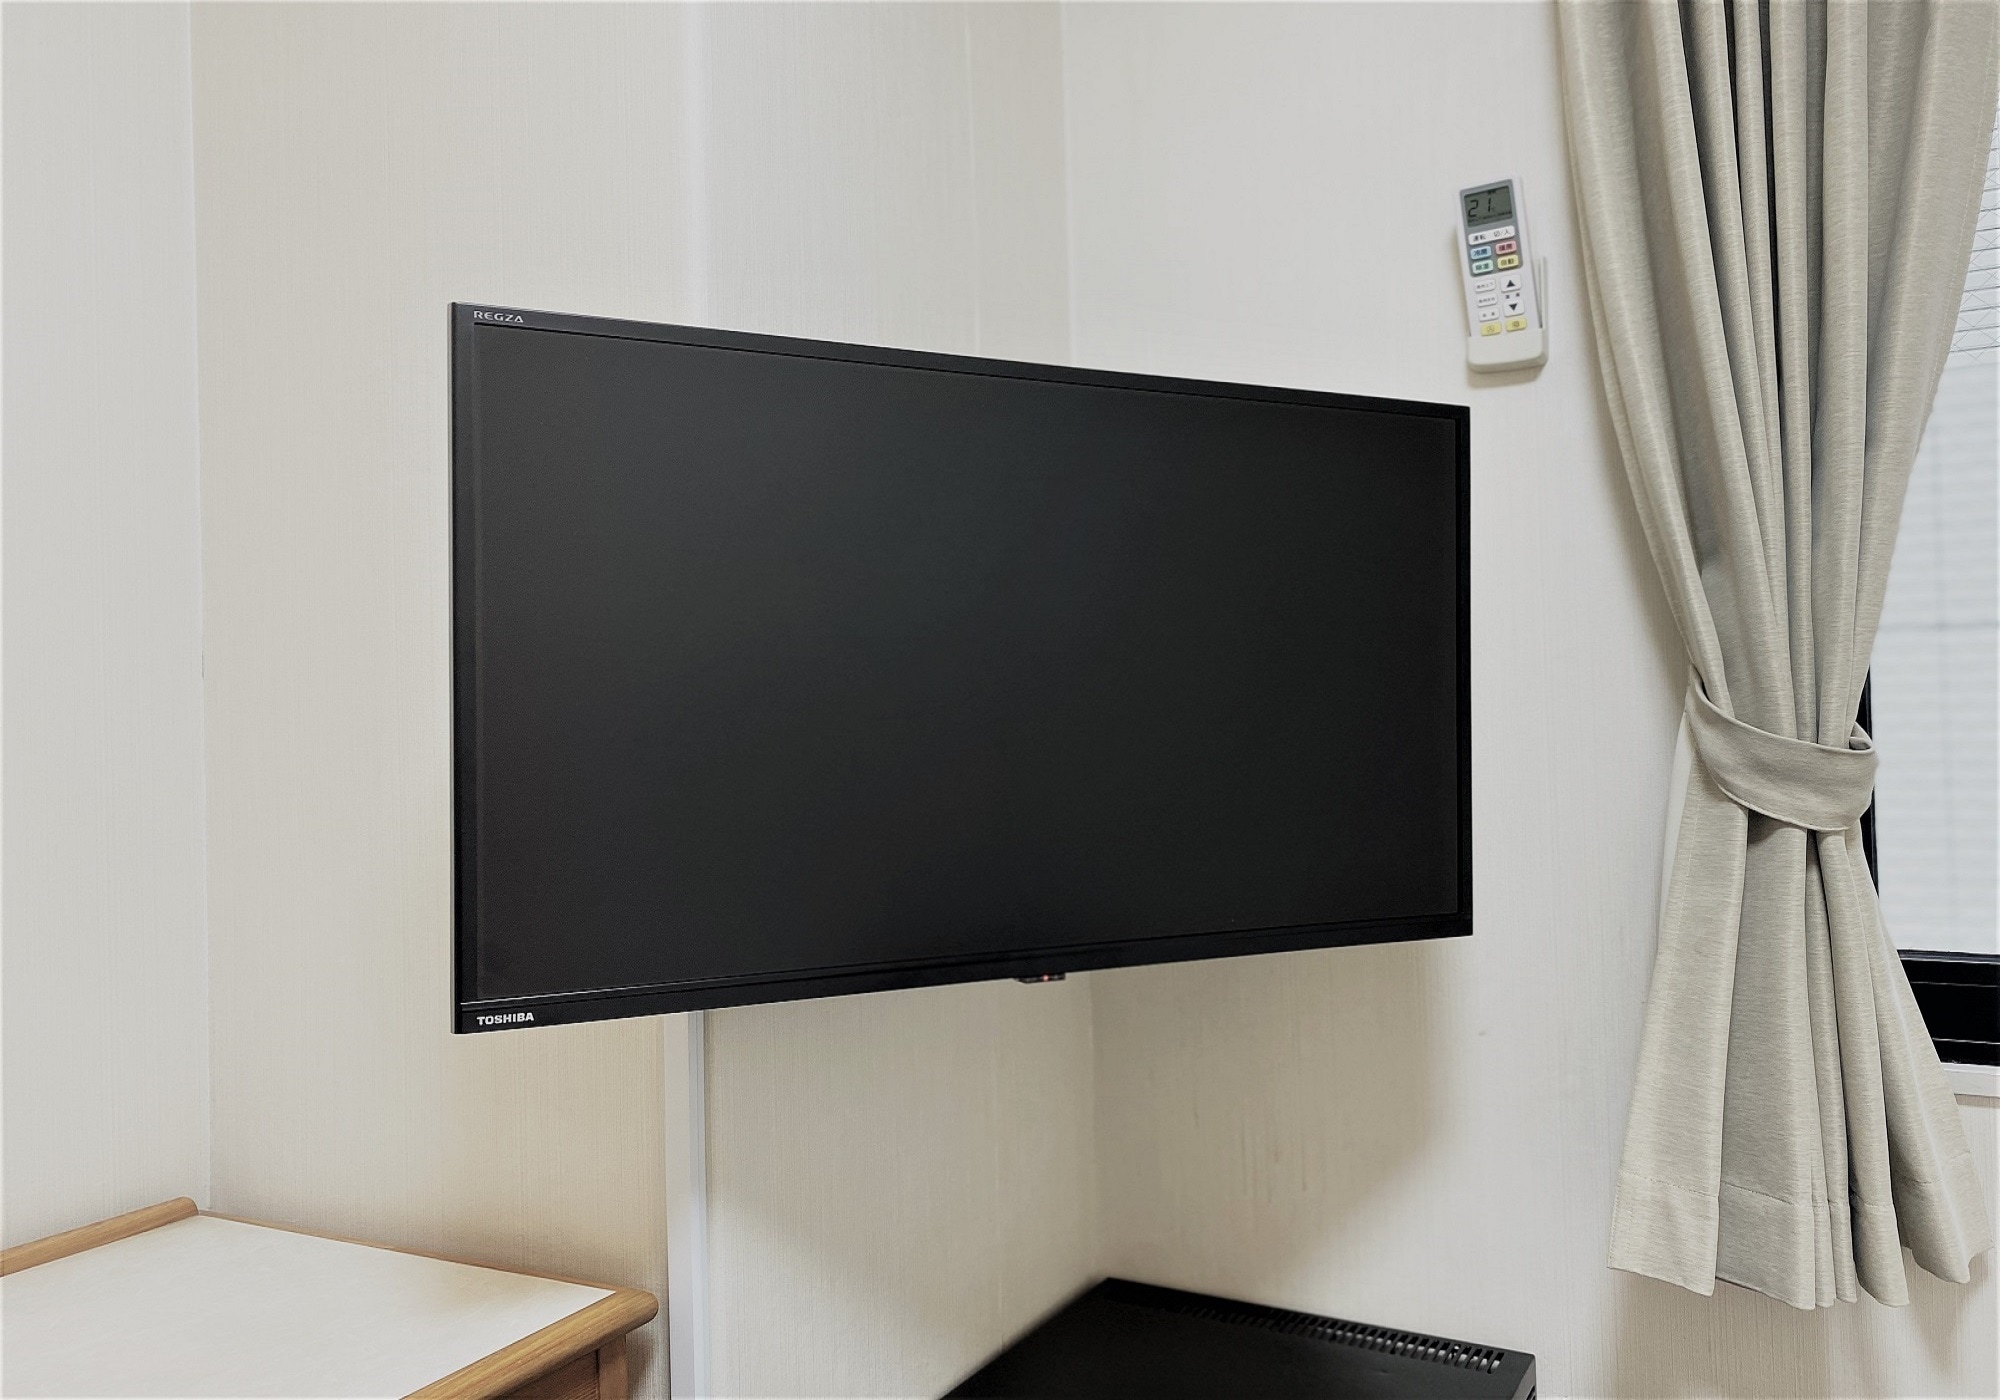 Introducing a new 32-inch wall-mounted TV!